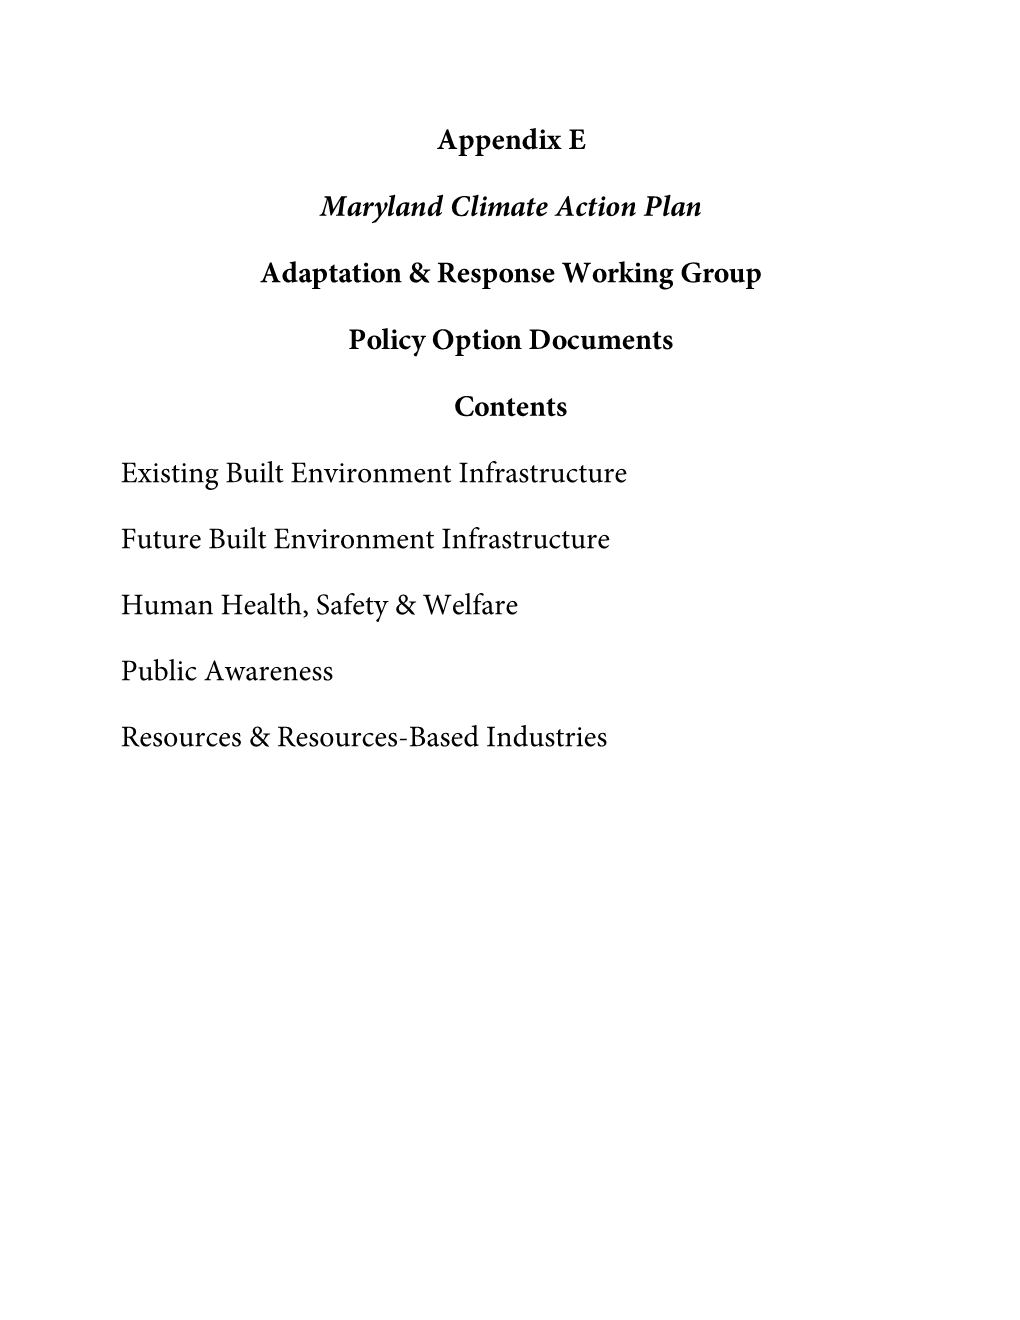 Appendix E Maryland Climate Action Plan Adaptation & Response Working Group Policy Option Documents Contents Existing Built